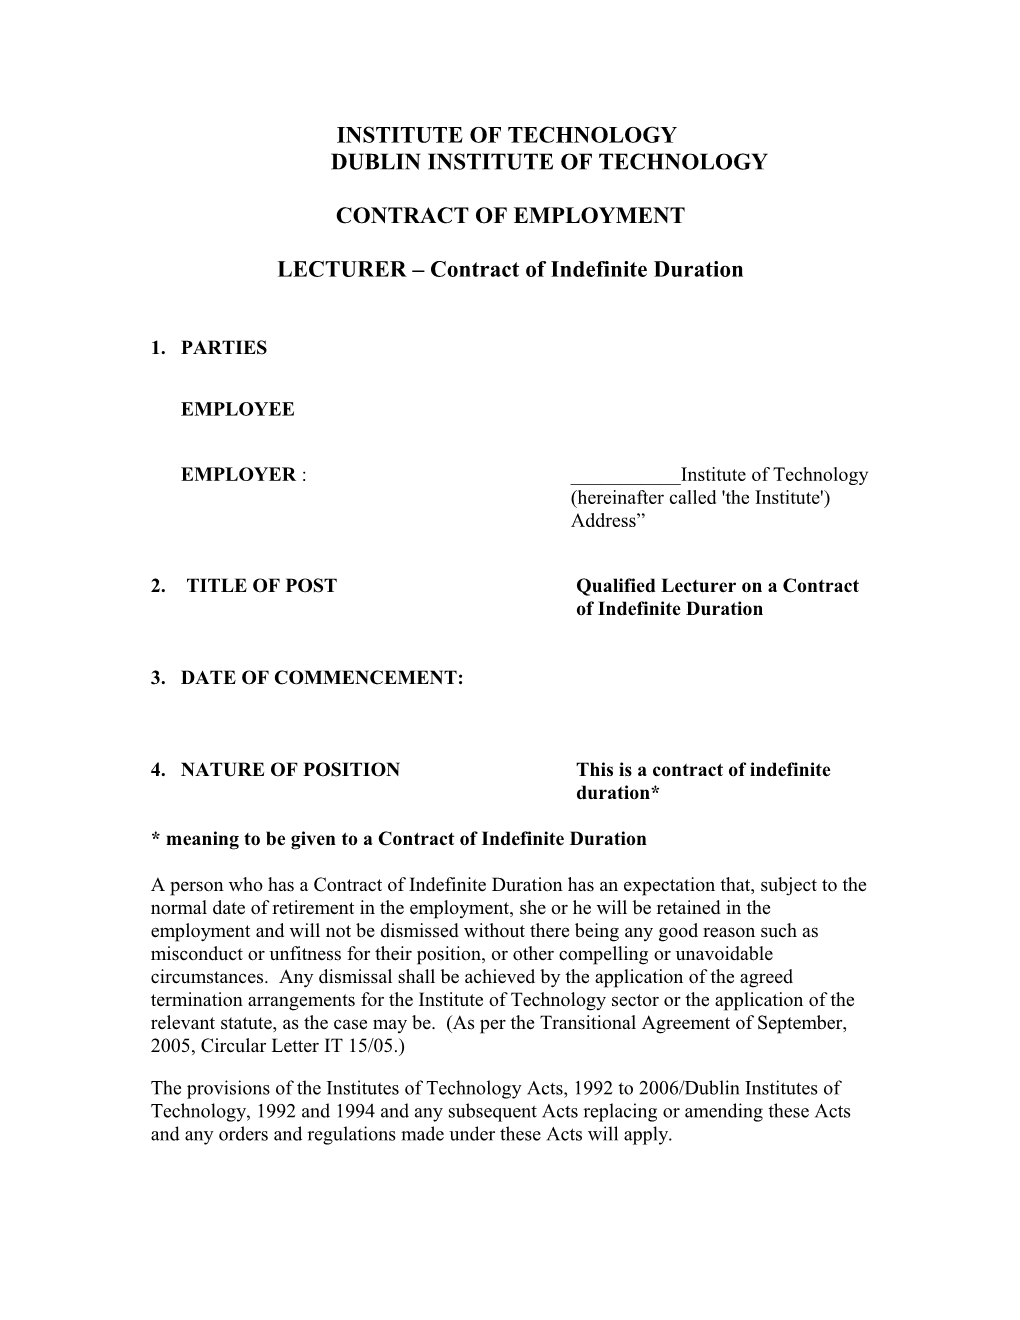 Contract of Indefinite Duration - Lecturer - IOT/DIT - 2007